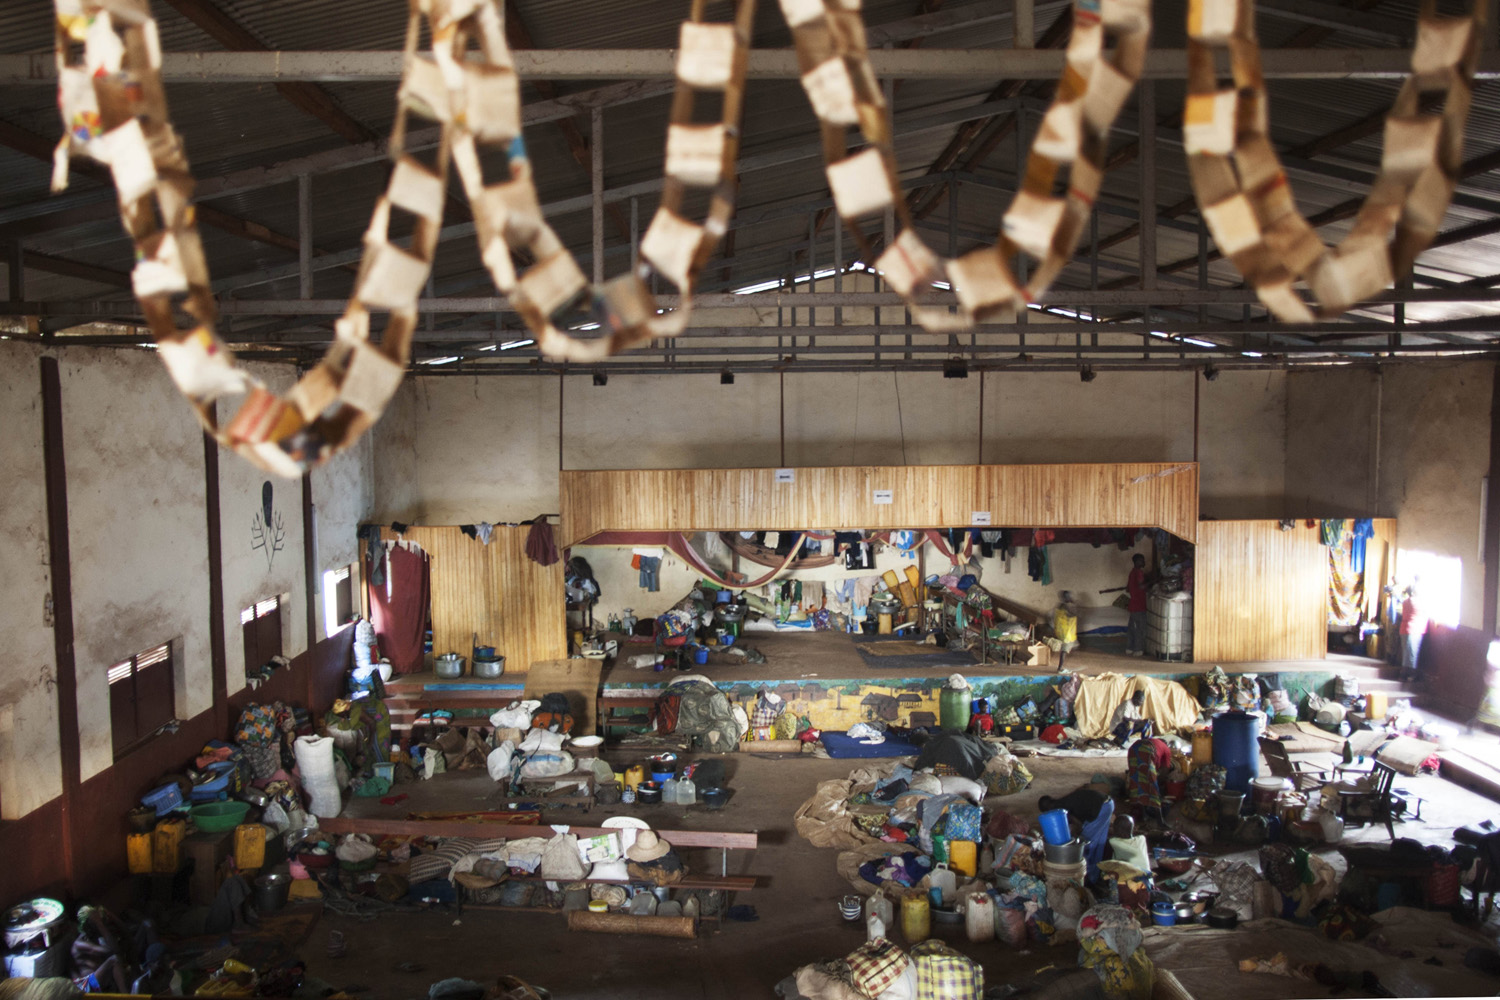 Humanitarian Crisis in Central African Republic